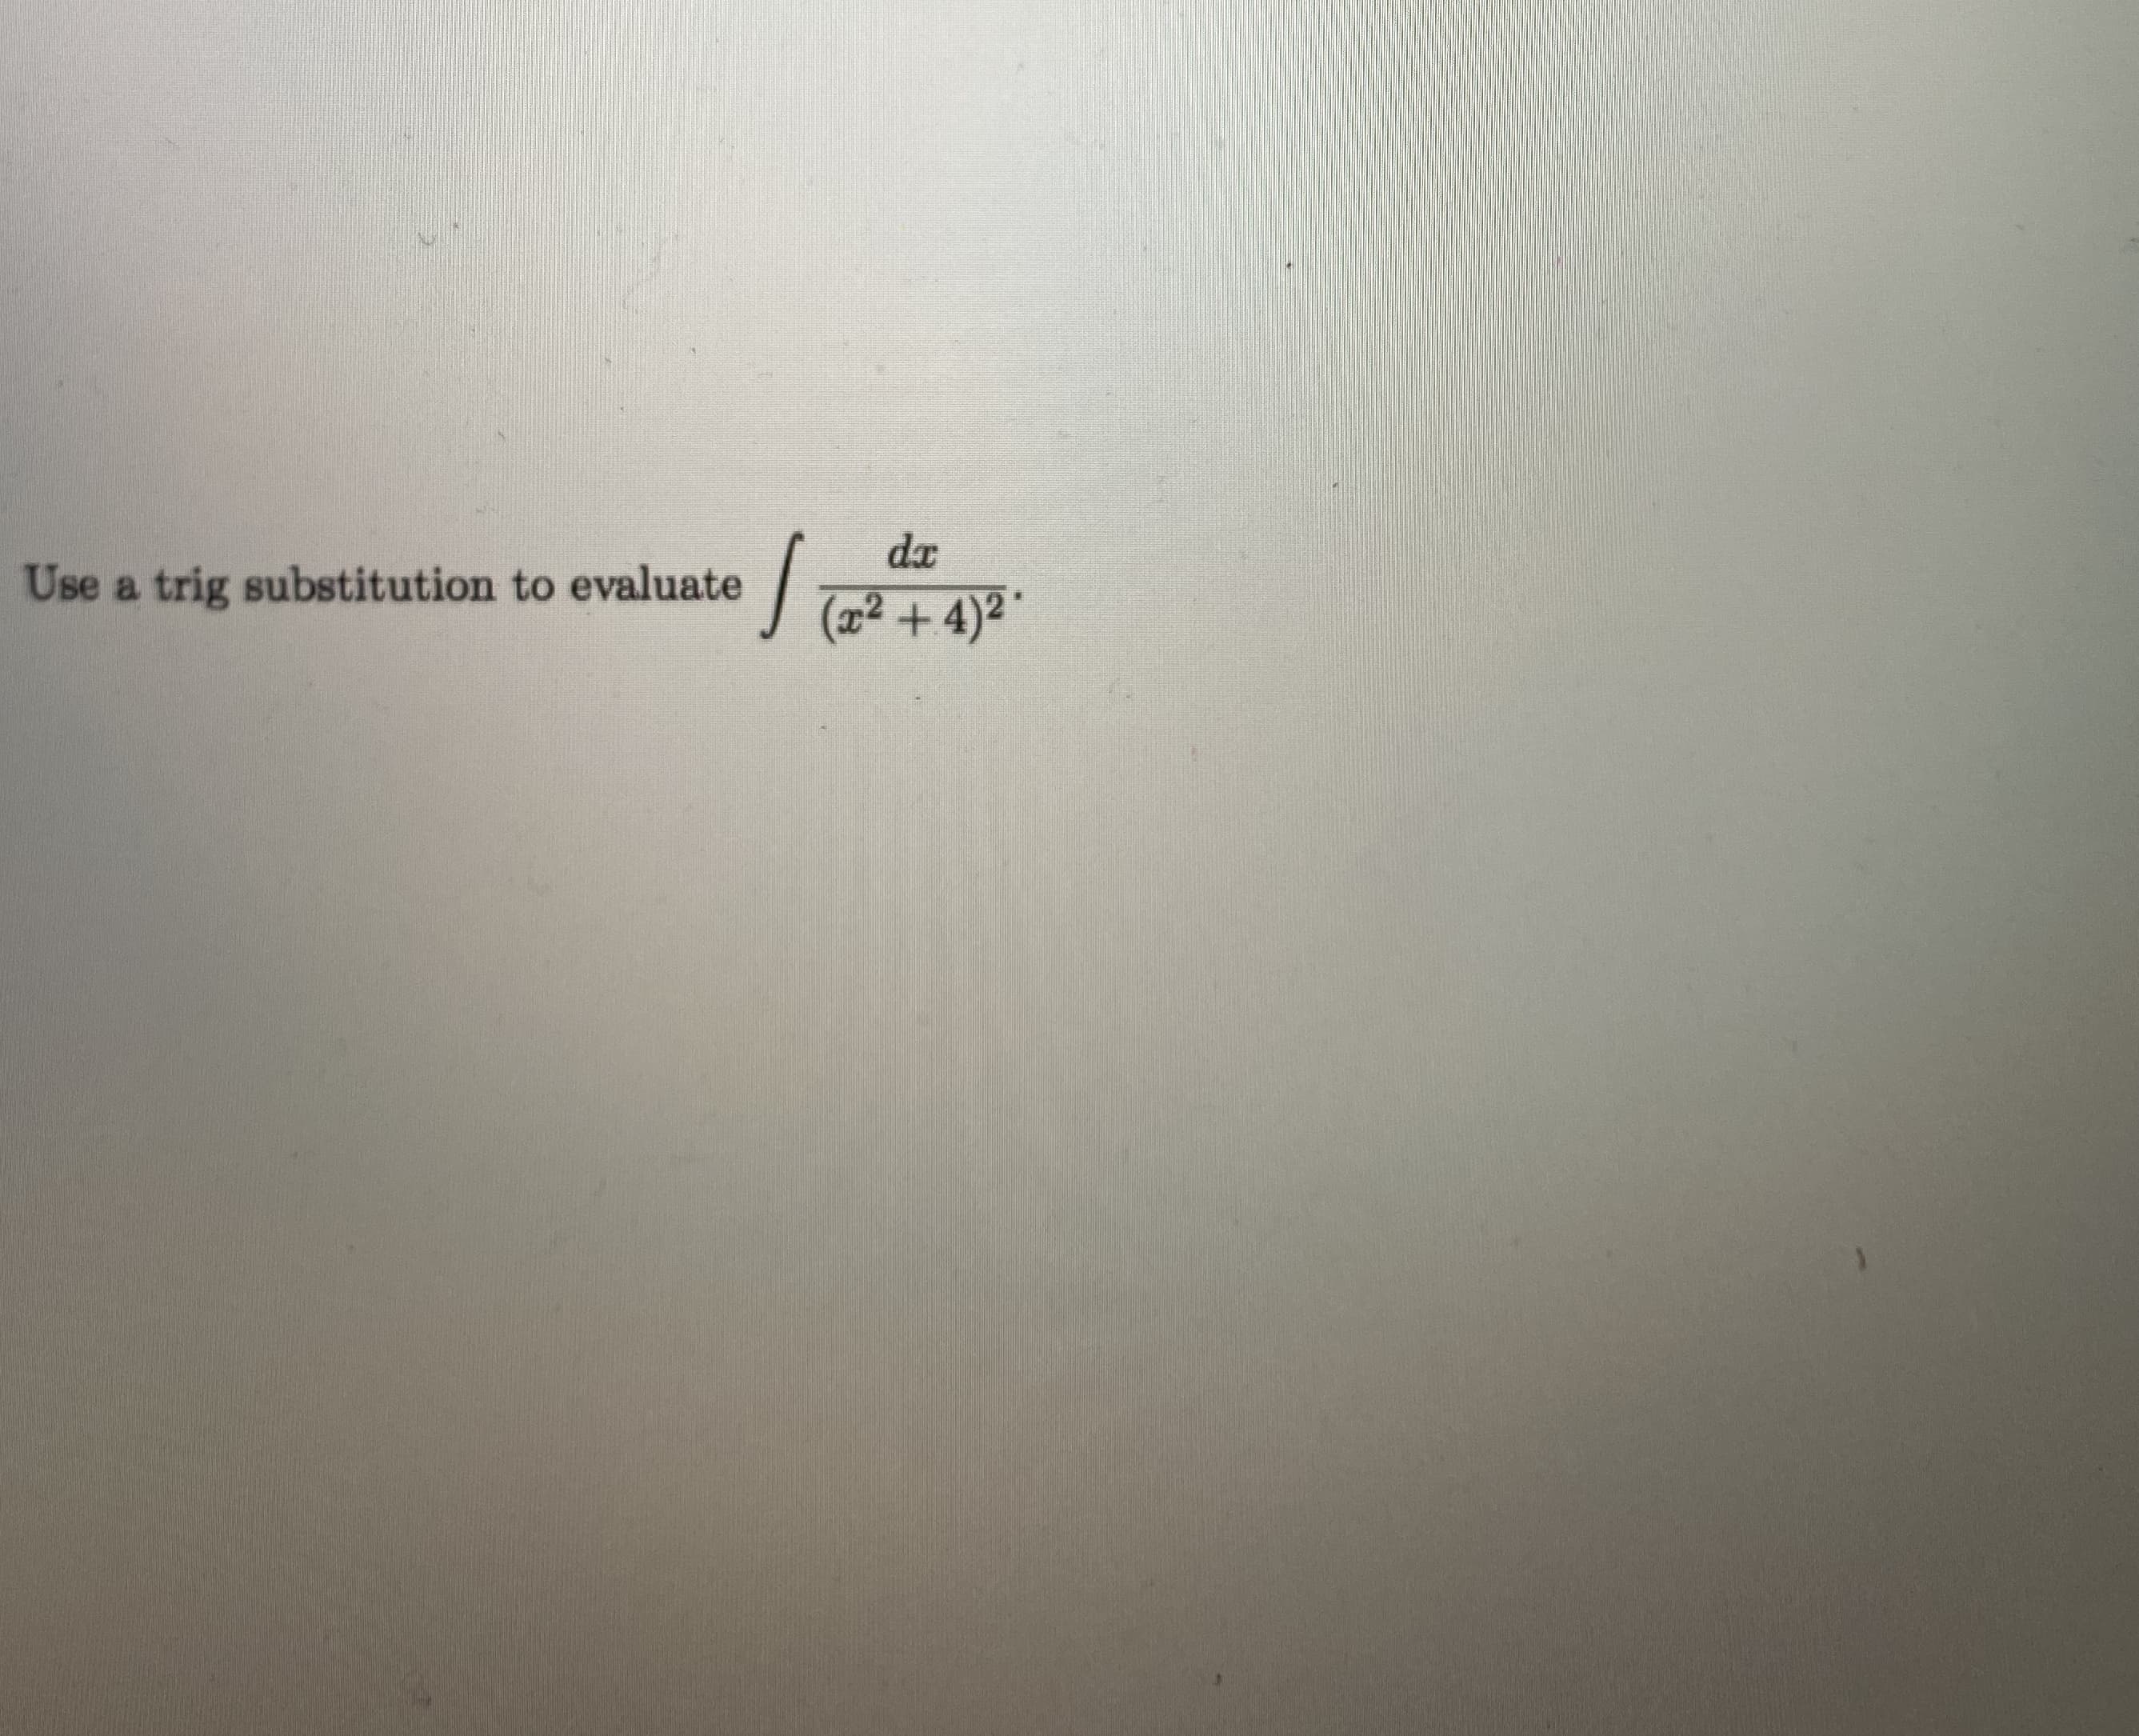 da
Use a trig substitution to evaluate
(22
+4)2"
